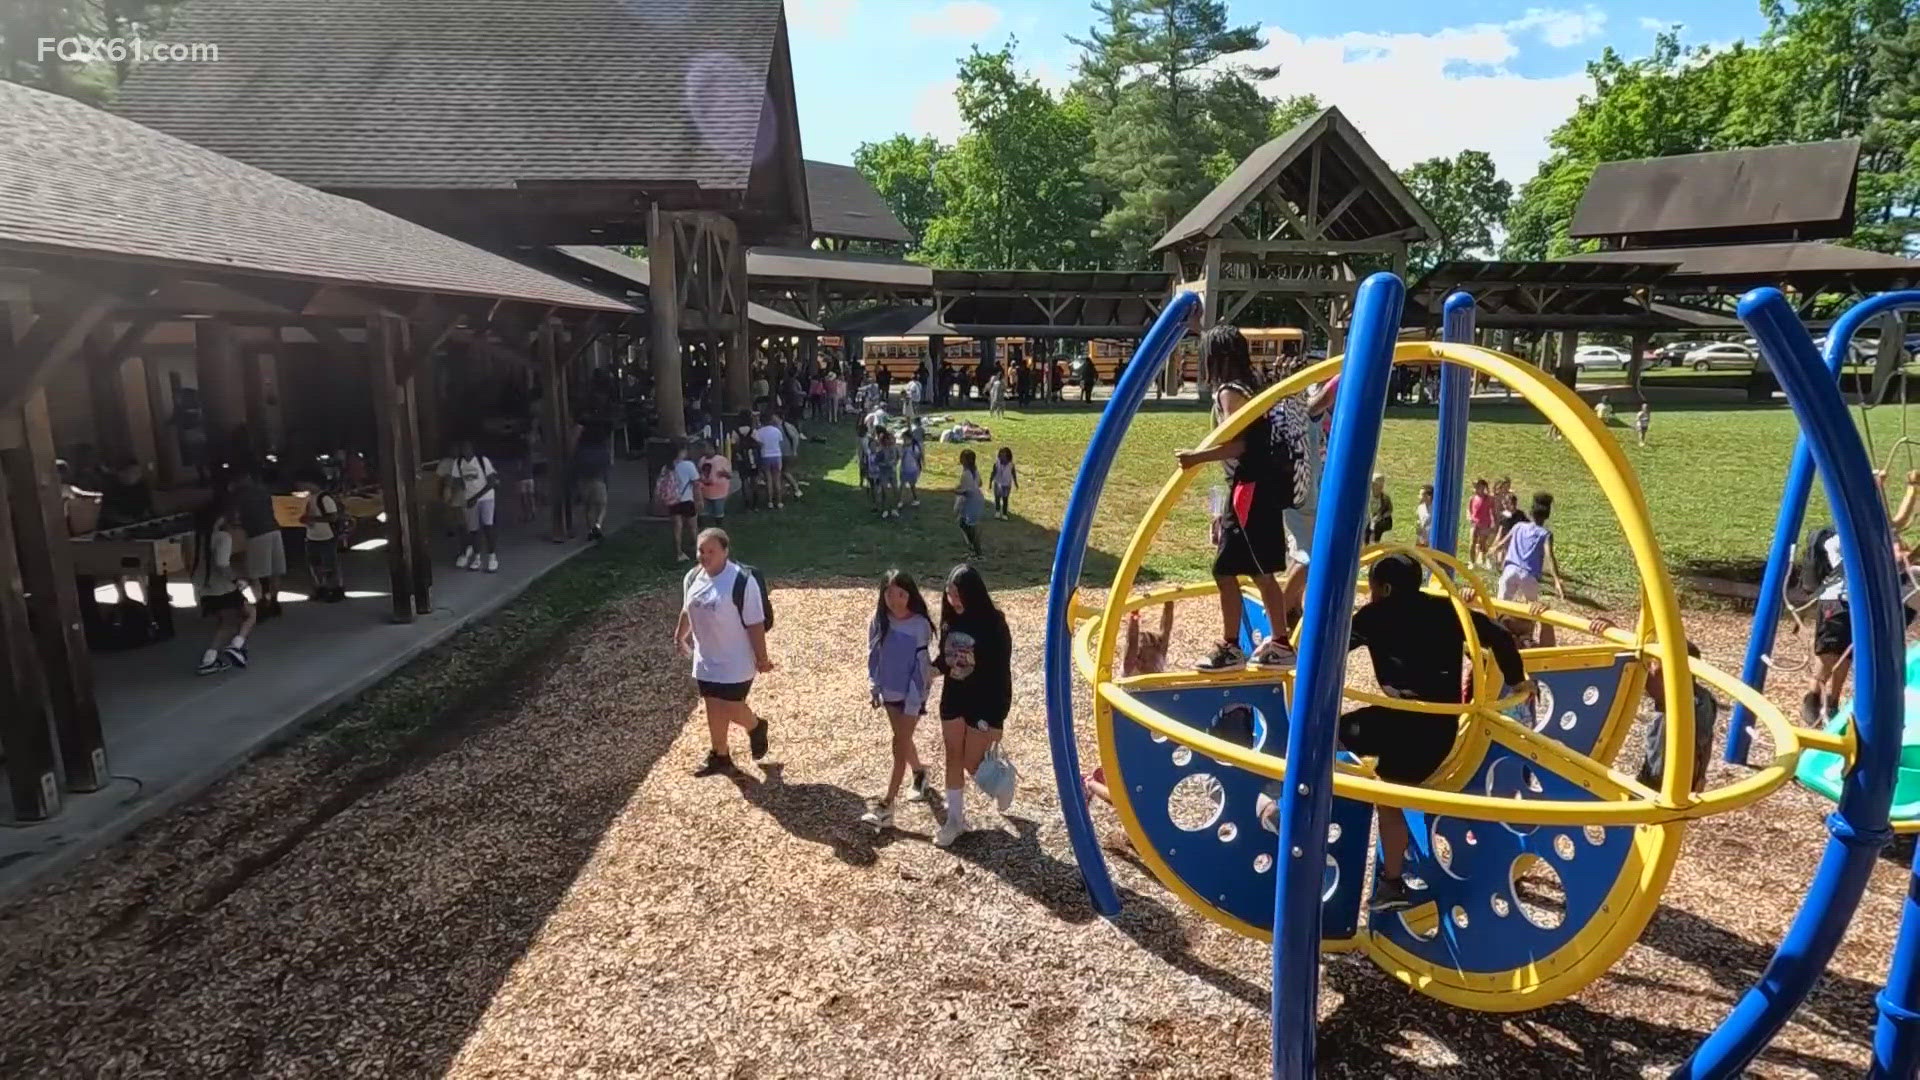 Camp Courant, the largest and oldest free summer day program in the U.S., opened its gates for the 130th year.